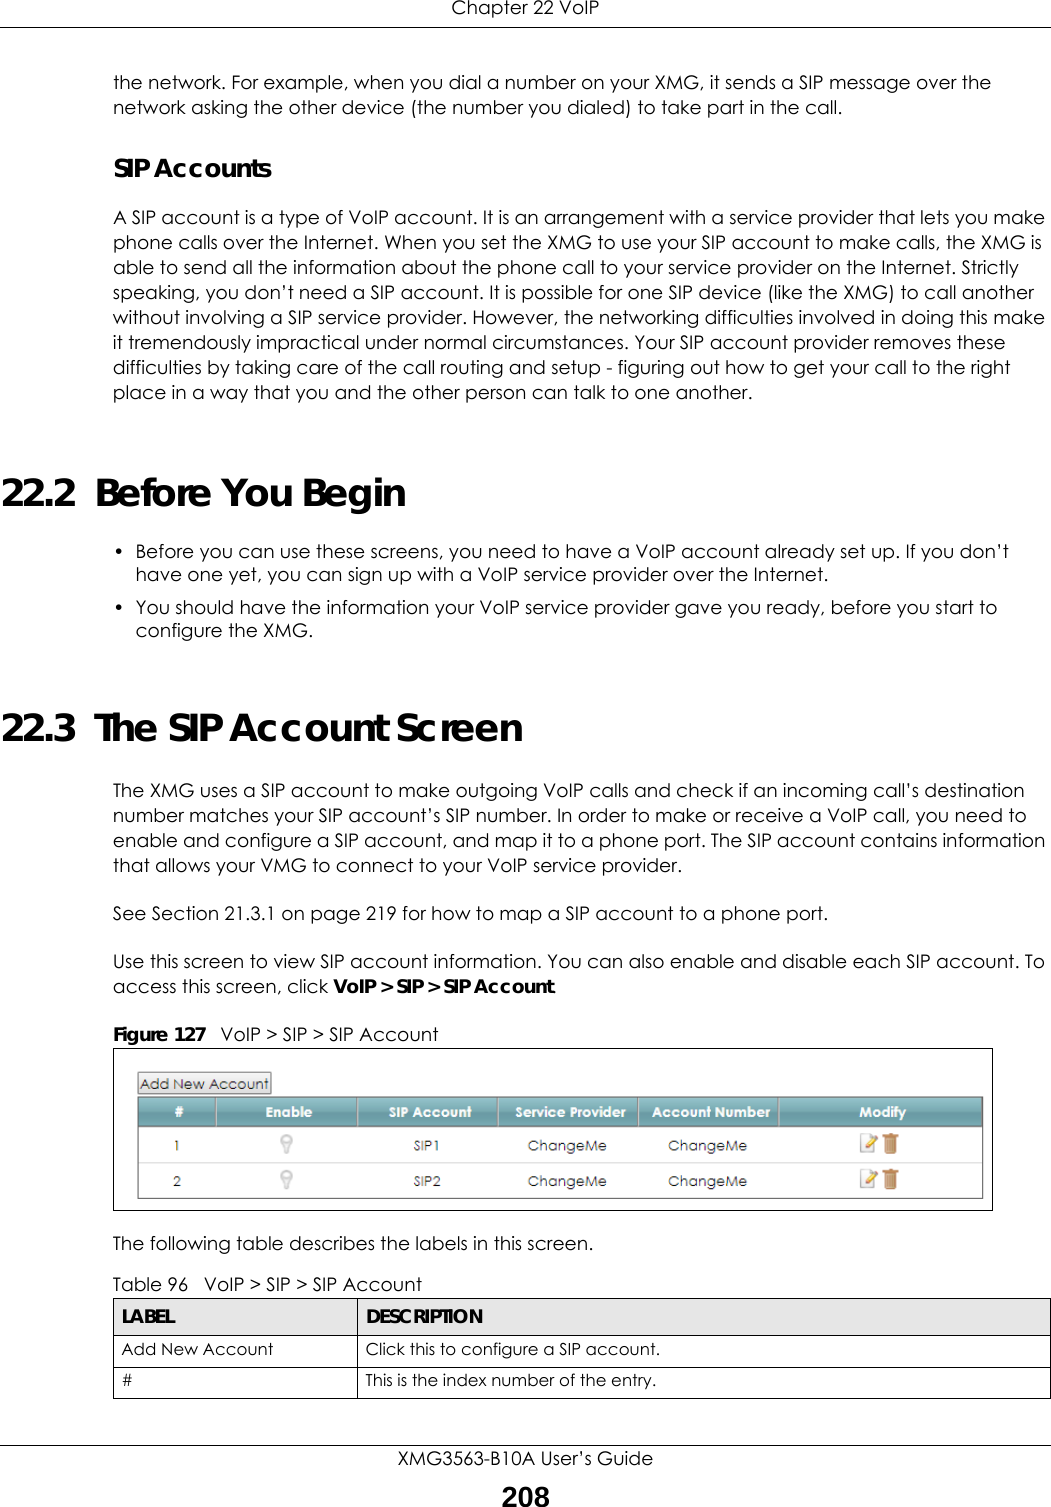 Chapter 22 VoIPXMG3563-B10A User’s Guide208the network. For example, when you dial a number on your XMG, it sends a SIP message over the network asking the other device (the number you dialed) to take part in the call.SIP AccountsA SIP account is a type of VoIP account. It is an arrangement with a service provider that lets you make phone calls over the Internet. When you set the XMG to use your SIP account to make calls, the XMG is able to send all the information about the phone call to your service provider on the Internet. Strictly speaking, you don’t need a SIP account. It is possible for one SIP device (like the XMG) to call another without involving a SIP service provider. However, the networking difficulties involved in doing this make it tremendously impractical under normal circumstances. Your SIP account provider removes these difficulties by taking care of the call routing and setup - figuring out how to get your call to the right place in a way that you and the other person can talk to one another.22.2  Before You Begin• Before you can use these screens, you need to have a VoIP account already set up. If you don’t have one yet, you can sign up with a VoIP service provider over the Internet. • You should have the information your VoIP service provider gave you ready, before you start to configure the XMG.22.3  The SIP Account ScreenThe XMG uses a SIP account to make outgoing VoIP calls and check if an incoming call’s destination number matches your SIP account’s SIP number. In order to make or receive a VoIP call, you need to enable and configure a SIP account, and map it to a phone port. The SIP account contains information that allows your VMG to connect to your VoIP service provider.See Section 21.3.1 on page 219 for how to map a SIP account to a phone port.Use this screen to view SIP account information. You can also enable and disable each SIP account. To access this screen, click VoIP &gt; SIP &gt; SIP Account.Figure 127   VoIP &gt; SIP &gt; SIP AccountThe following table describes the labels in this screen.Table 96   VoIP &gt; SIP &gt; SIP AccountLABEL DESCRIPTIONAdd New Account Click this to configure a SIP account.# This is the index number of the entry.